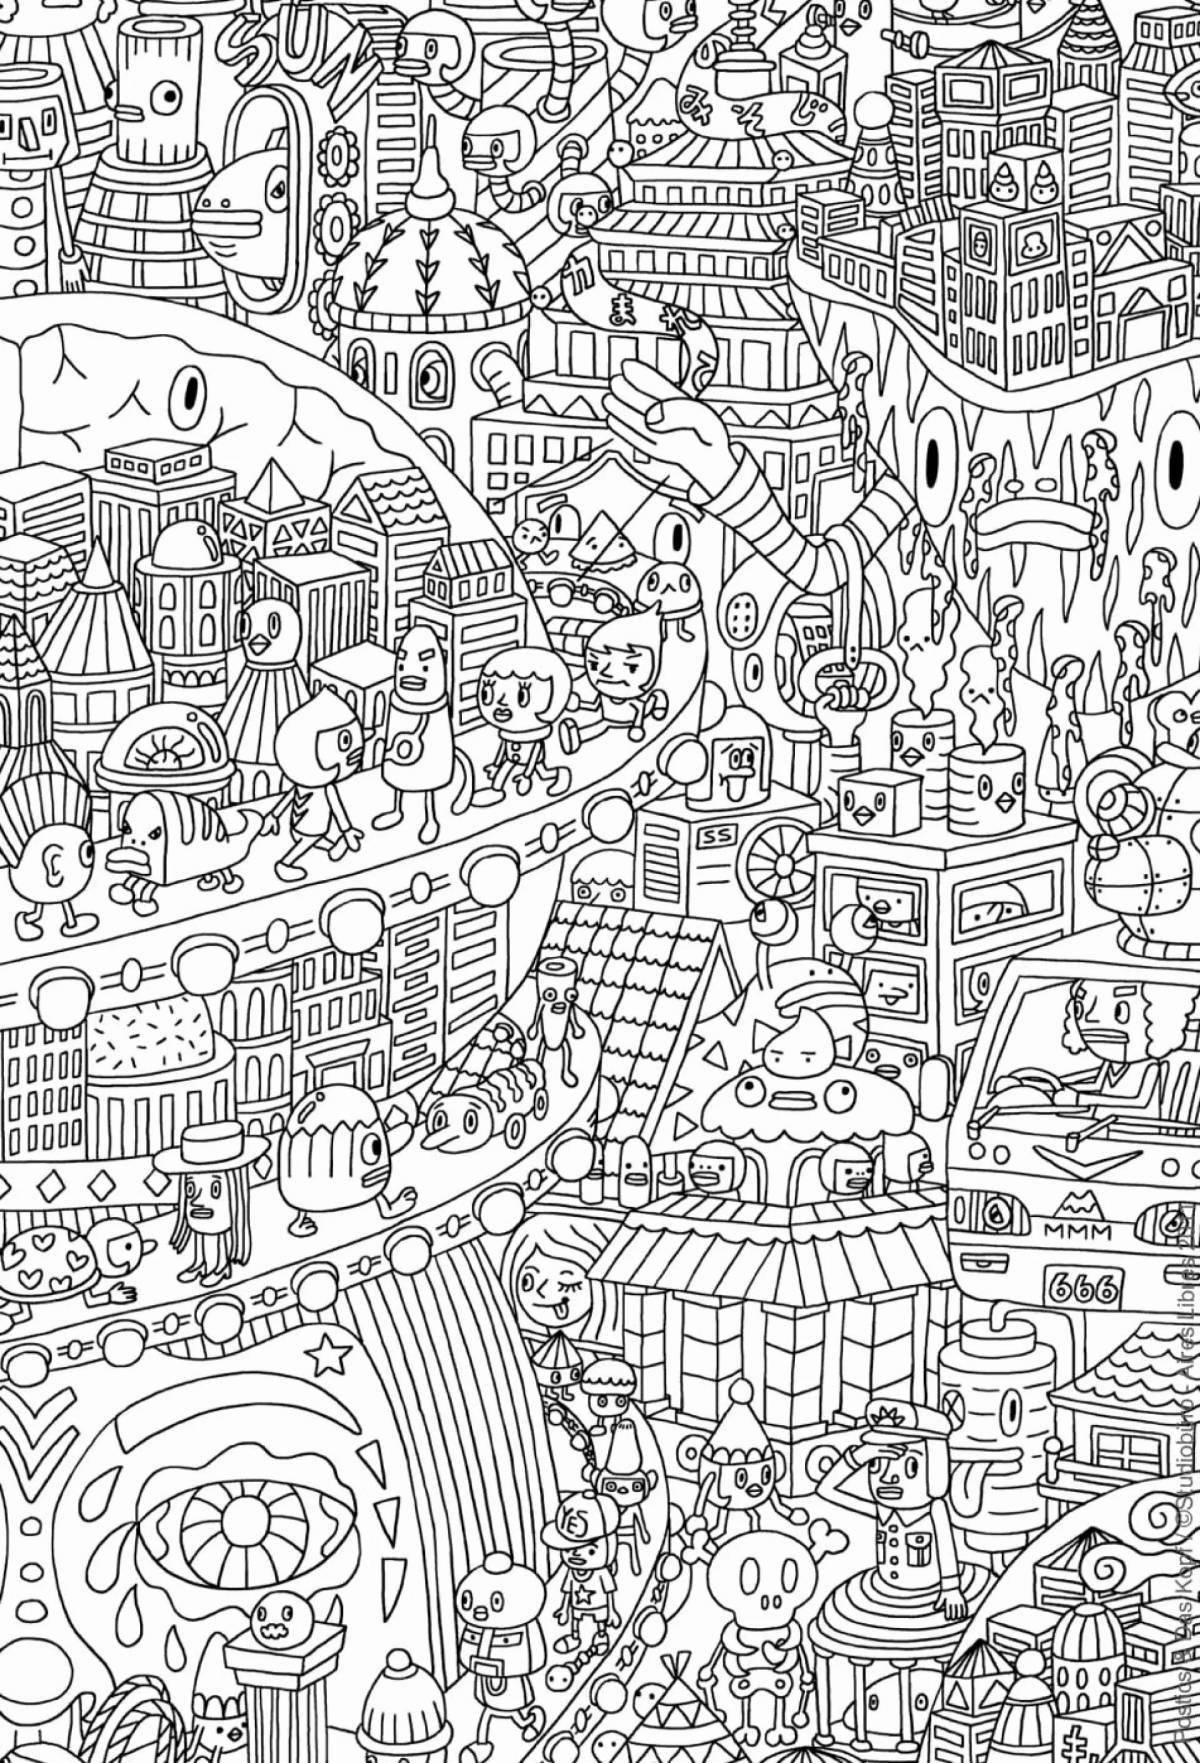 Awesome coloring page elements